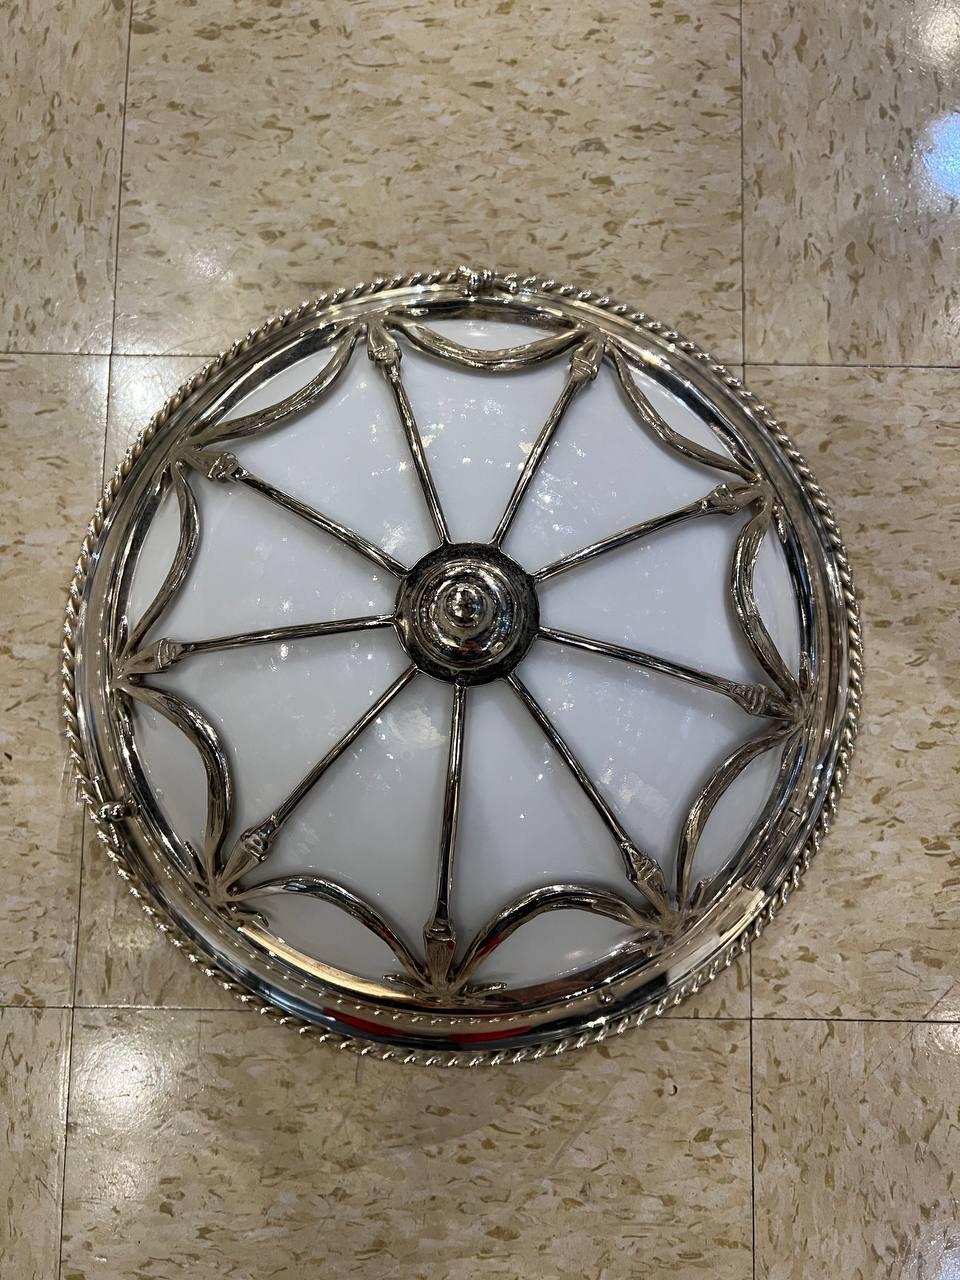 A circa 1930s French silver plated basis small light fixture with ribbon design and Opaline glass inside.

Dealer: G302YP